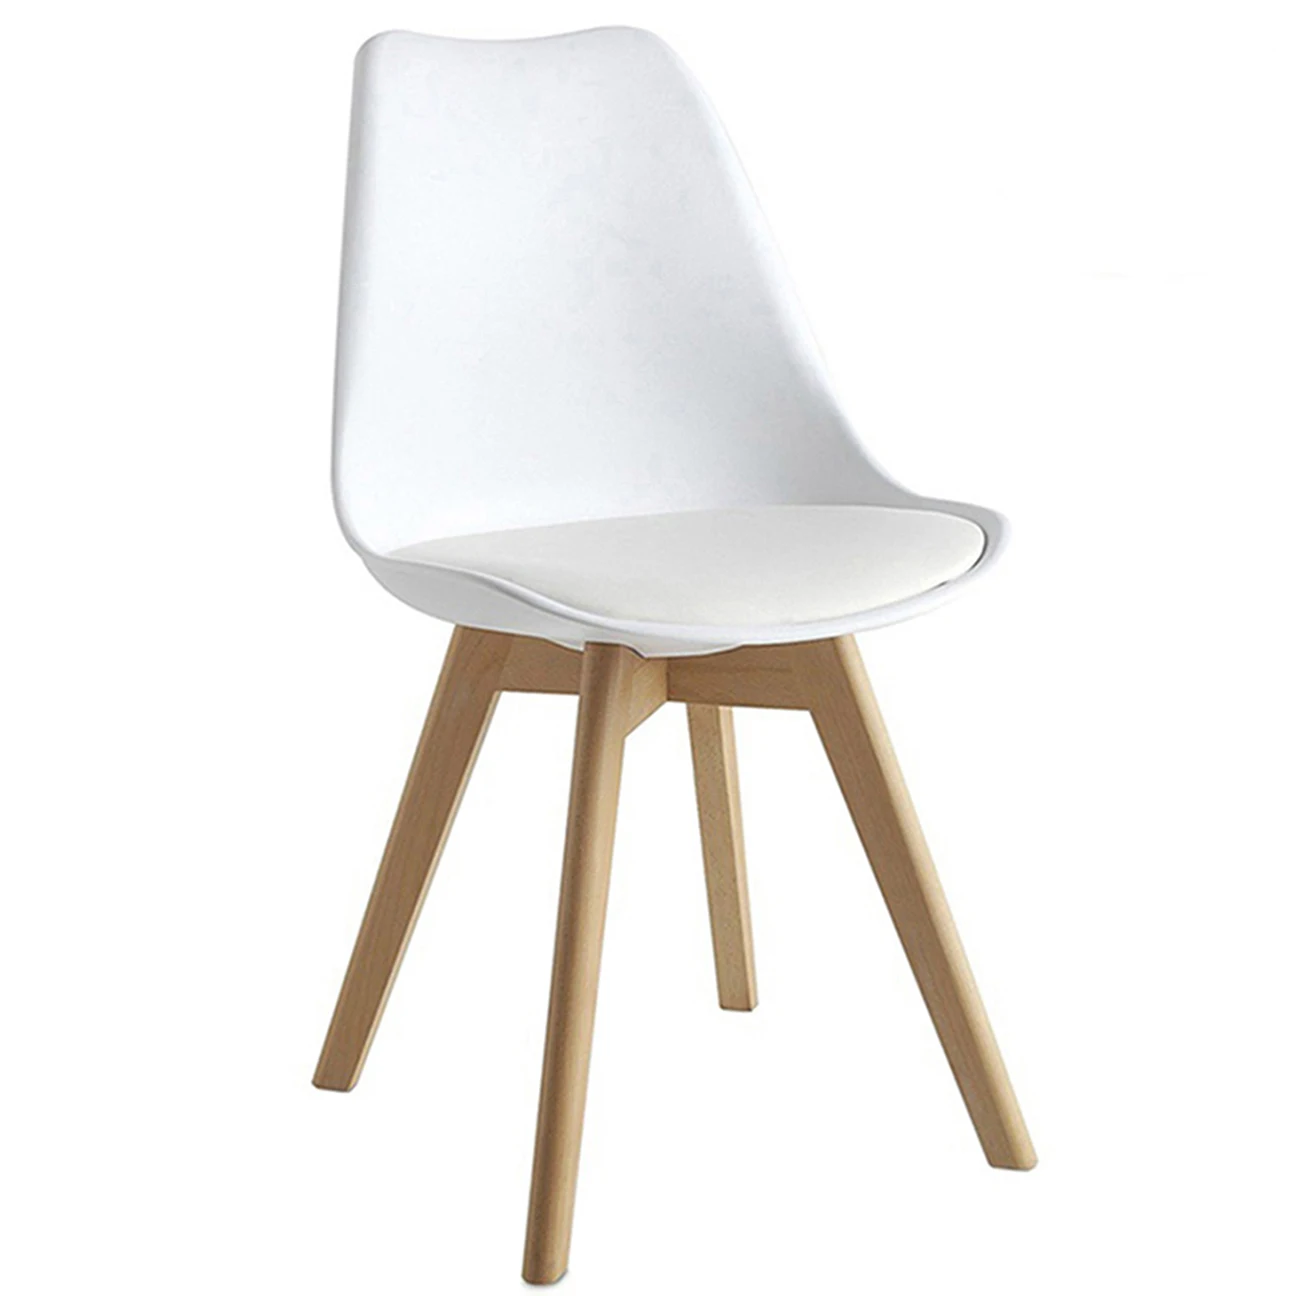 Home Furniture Types Of Plastic Chairs White Cushion Pp Tulip Chair With Wooden Legs Buy White Chair With Wooden Legs